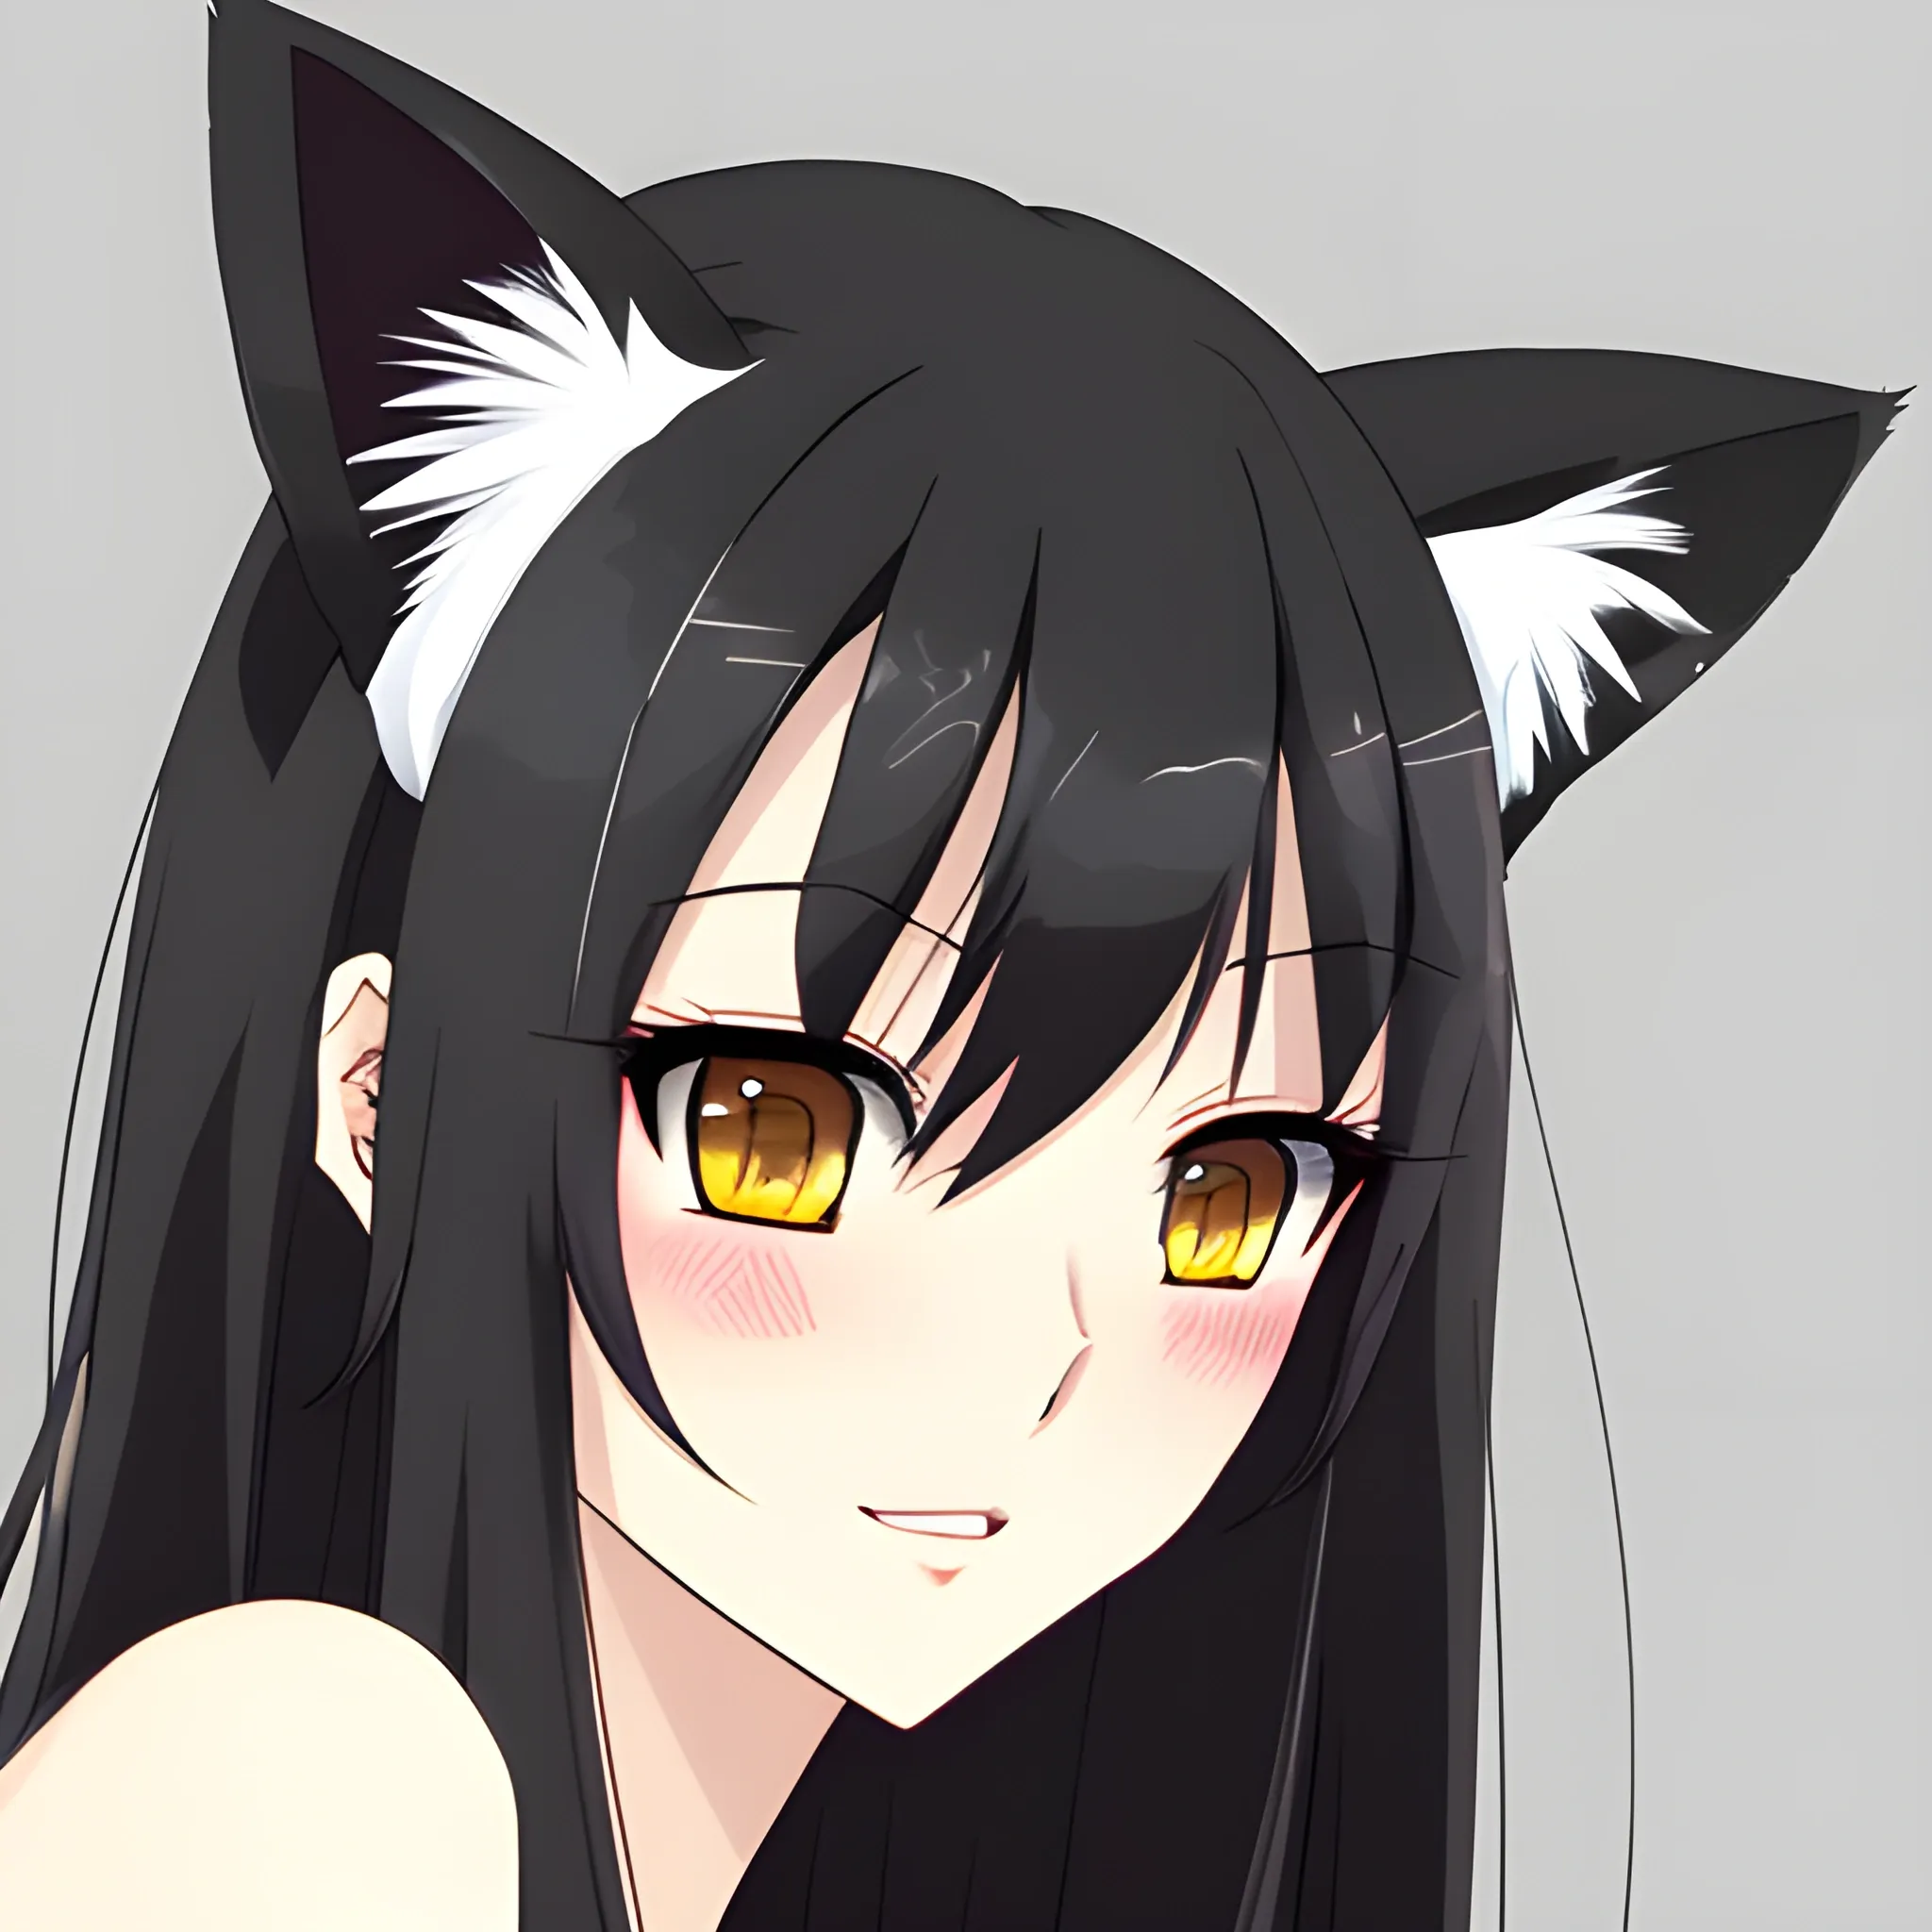 anime girl with black hair and cat ears